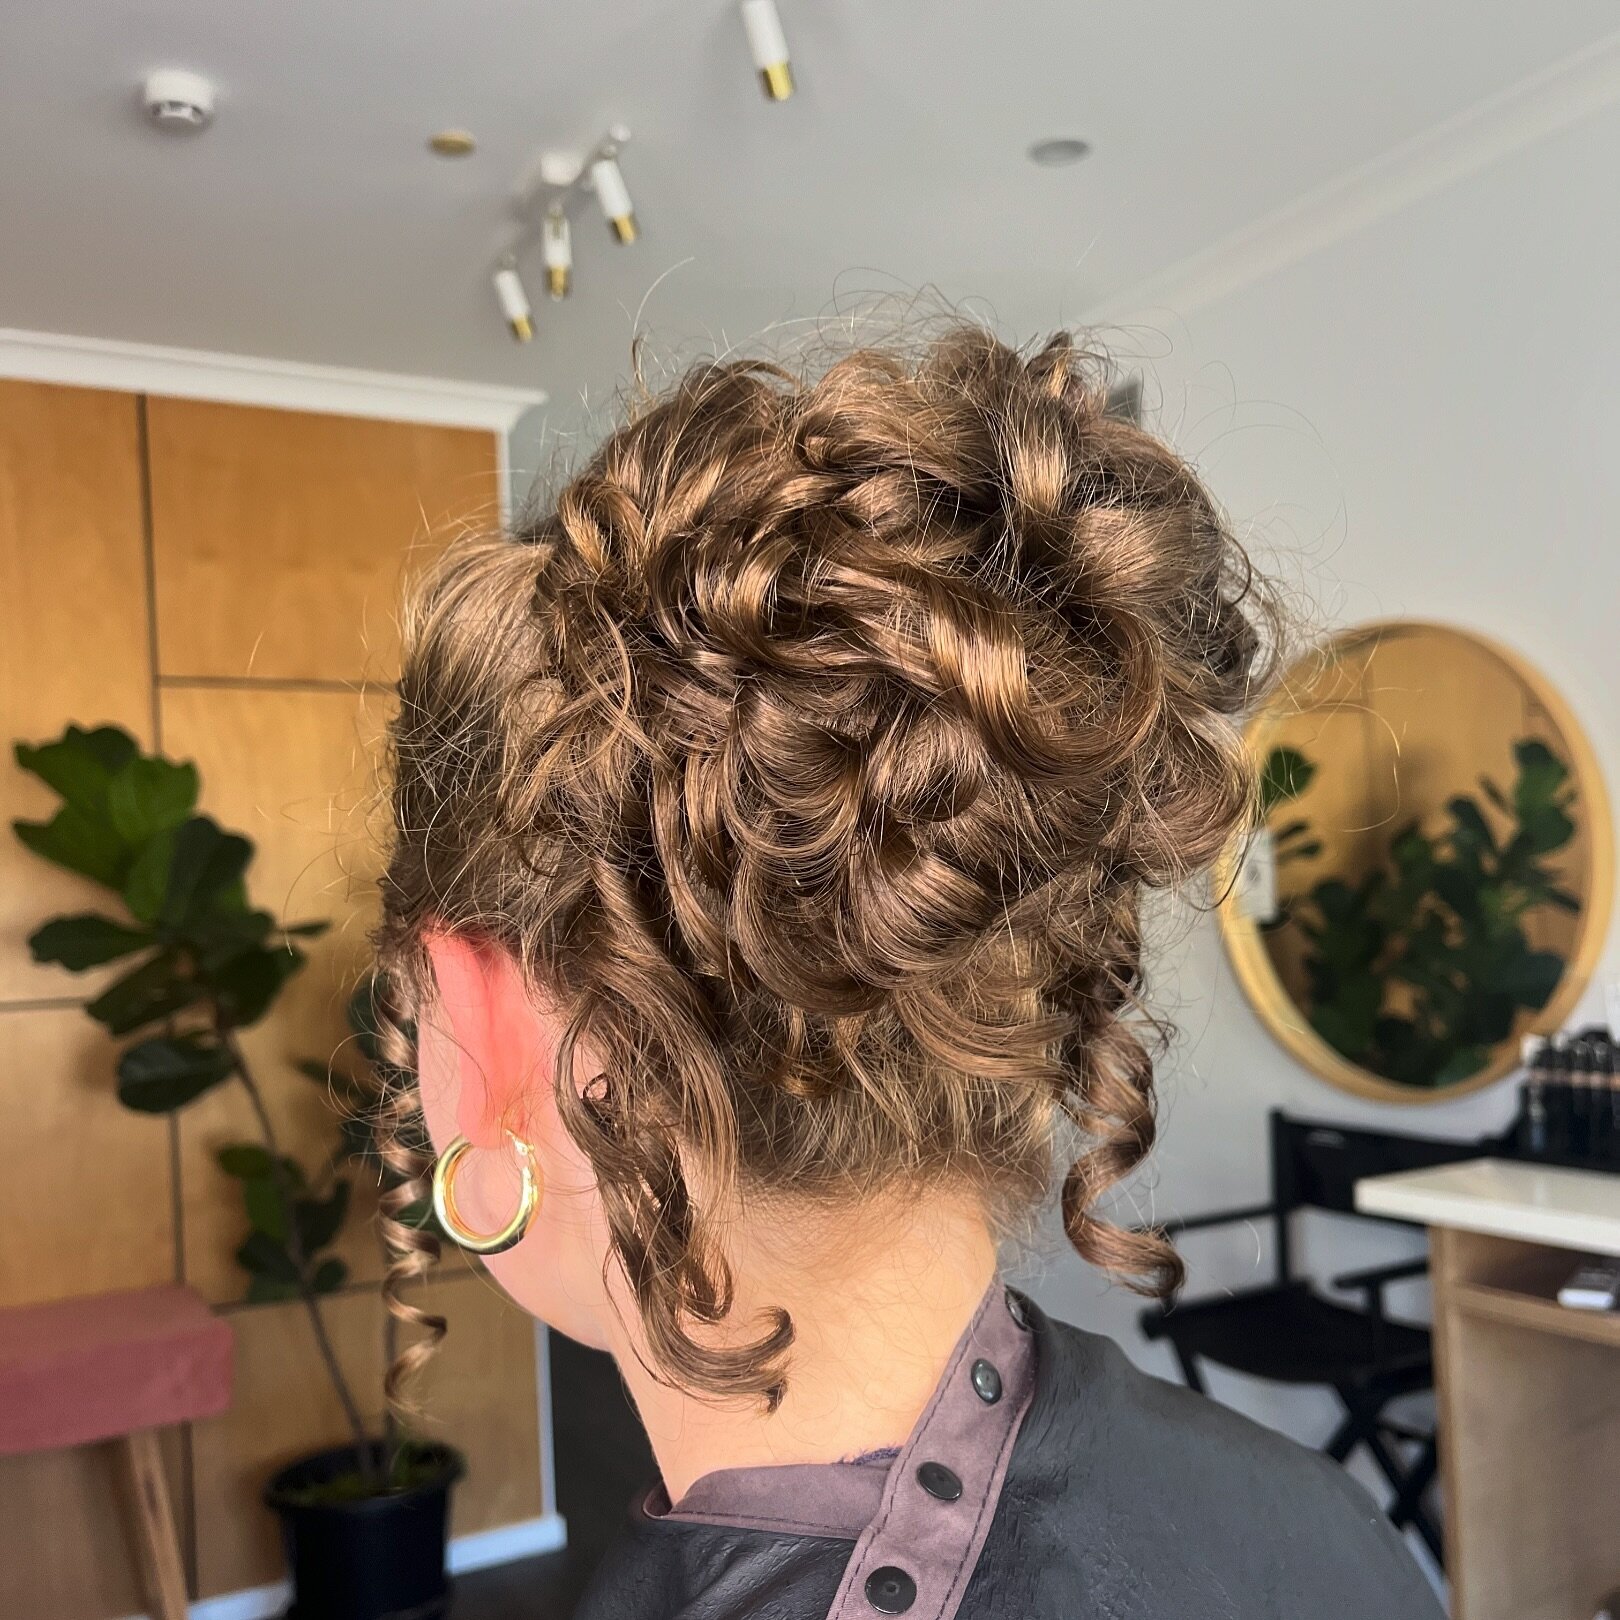 One of many hair-ups for our school ball girls🩷

Thank you to all our school ball girl for trusting us with your hair and makeup over the last few weeks. We had so much fun being part of your special day. 🩷🩷🩷

#hairup #hairupdo #schoolballhair #g